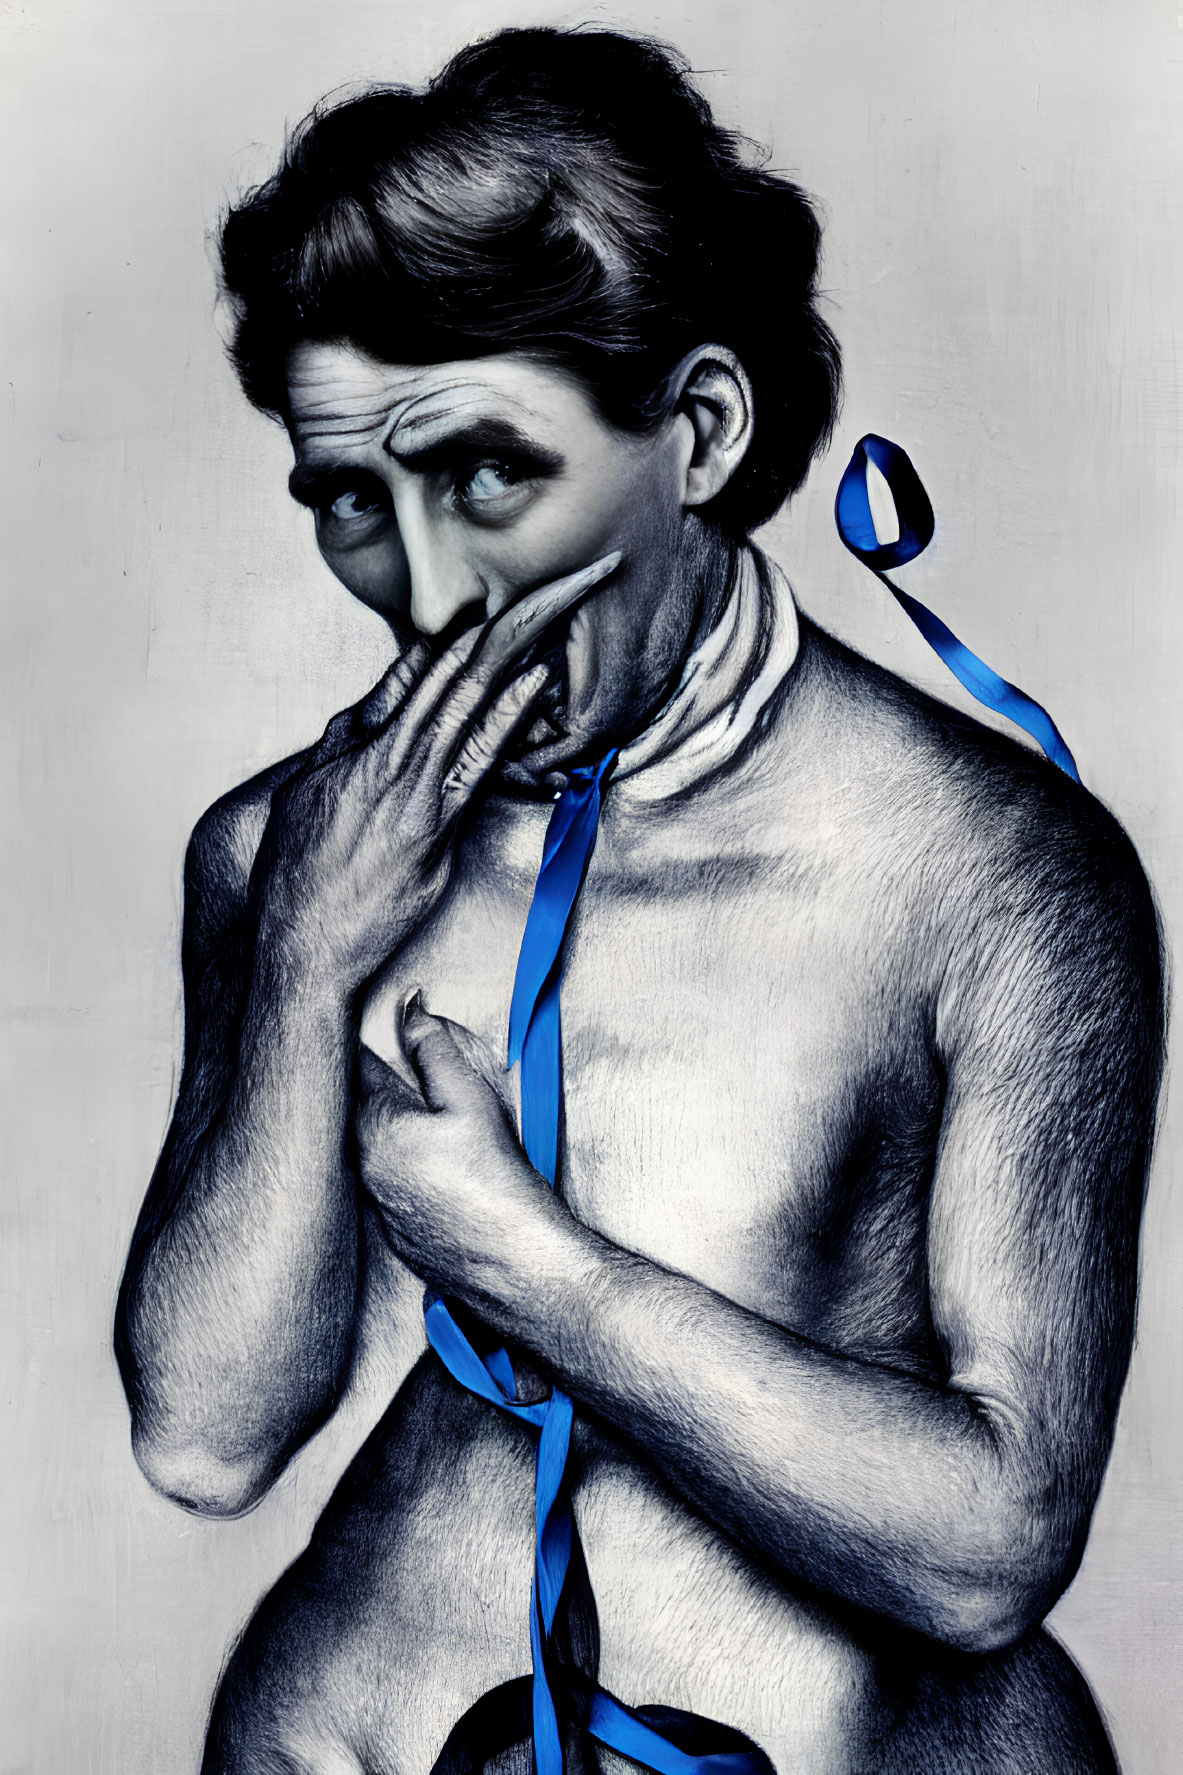 Monochrome surreal drawing of person with exaggerated features and blue ribbon.